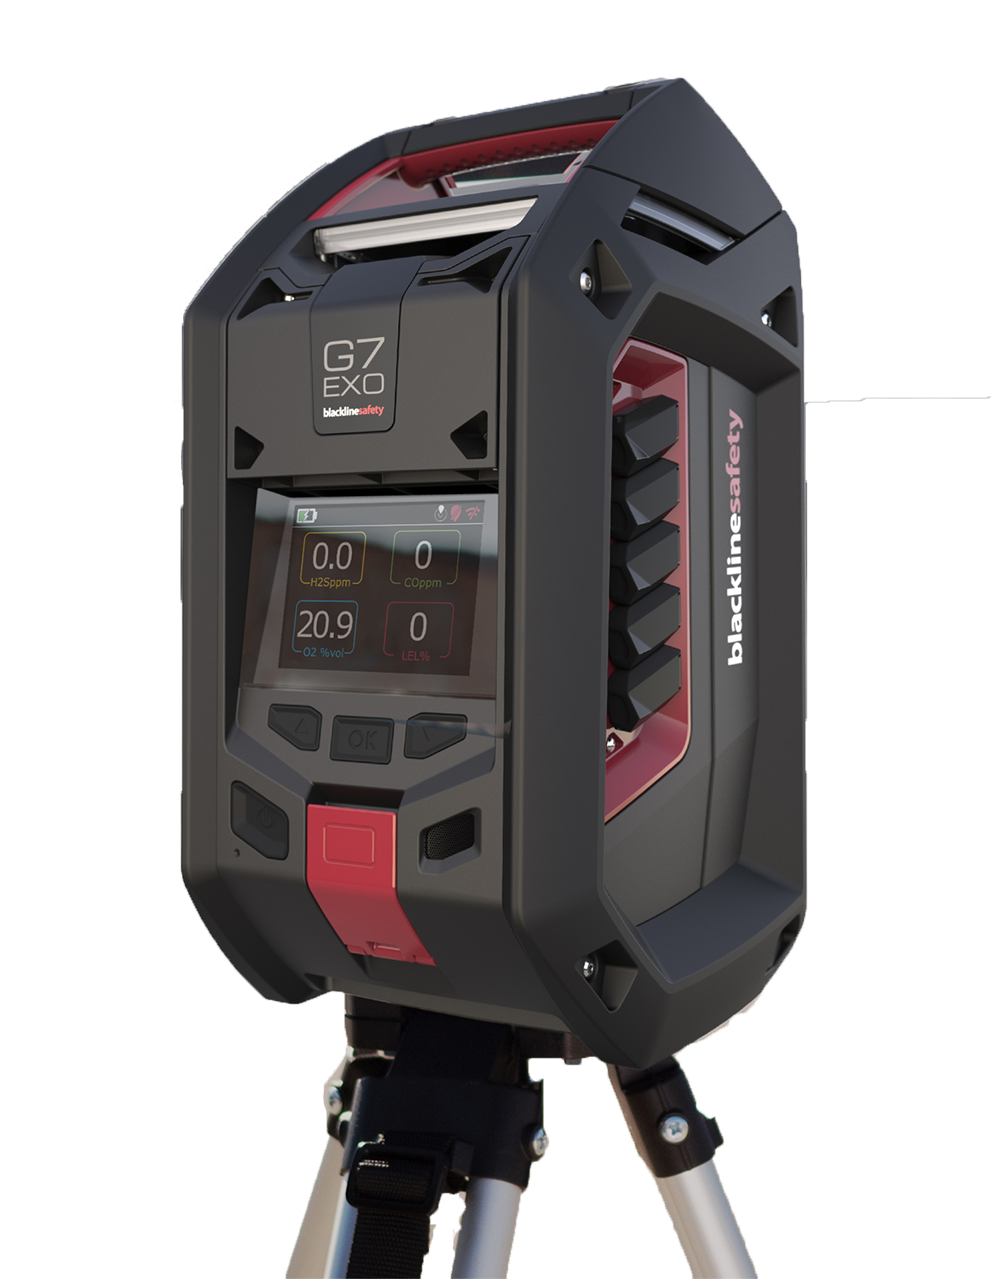 Blackline Safety's G7 gas monitoring device